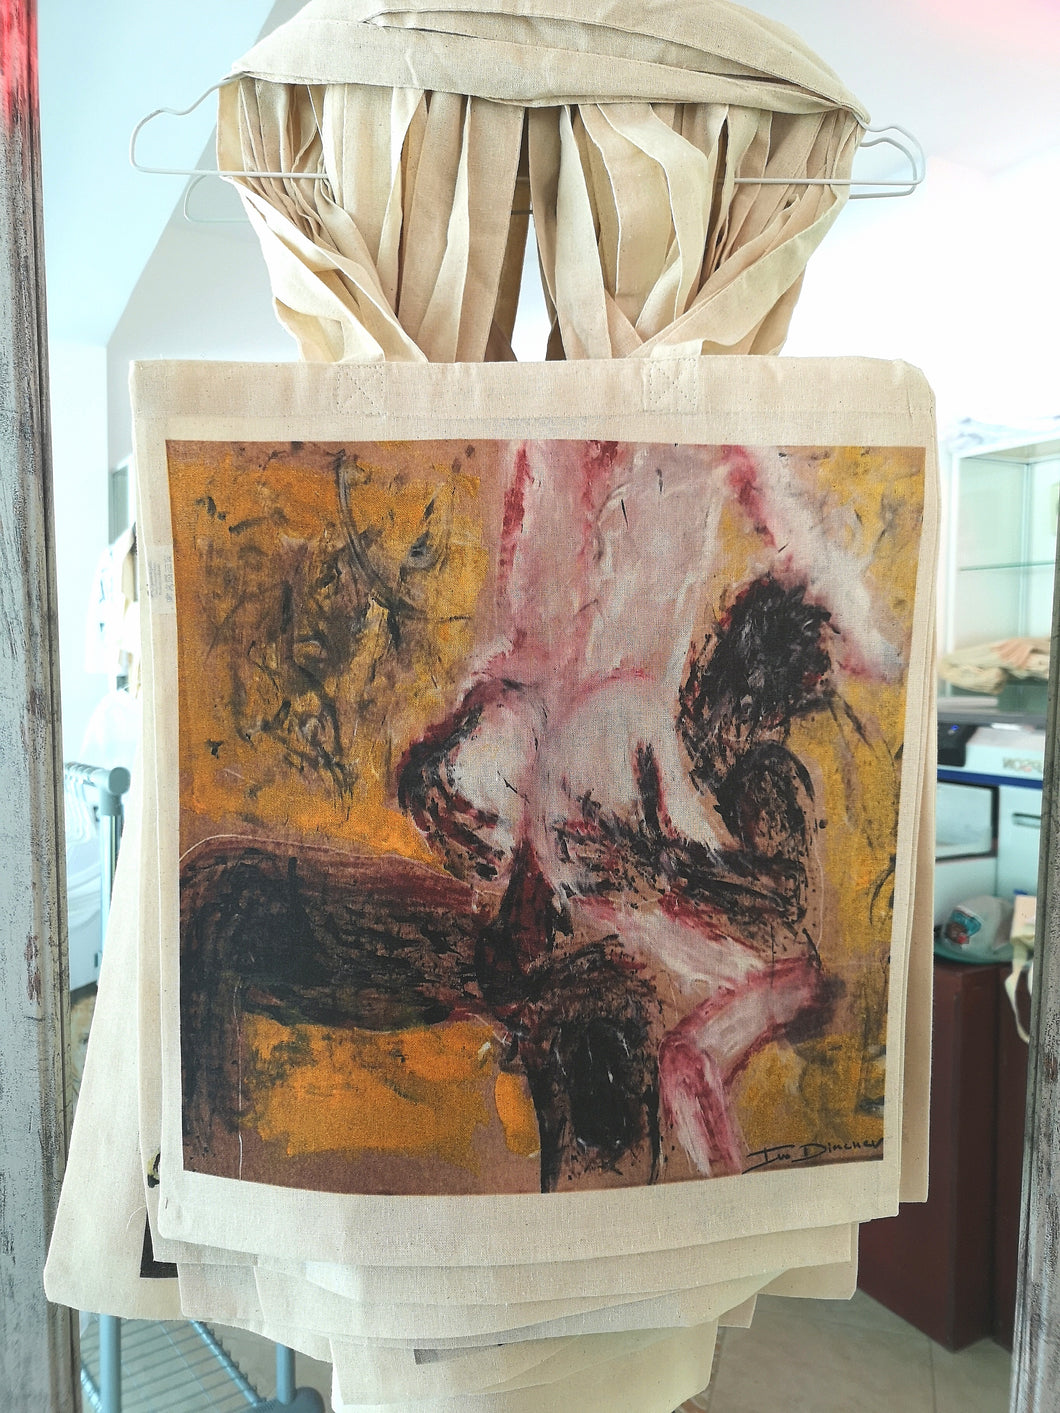 Erotic bag by Ivo Dimchev